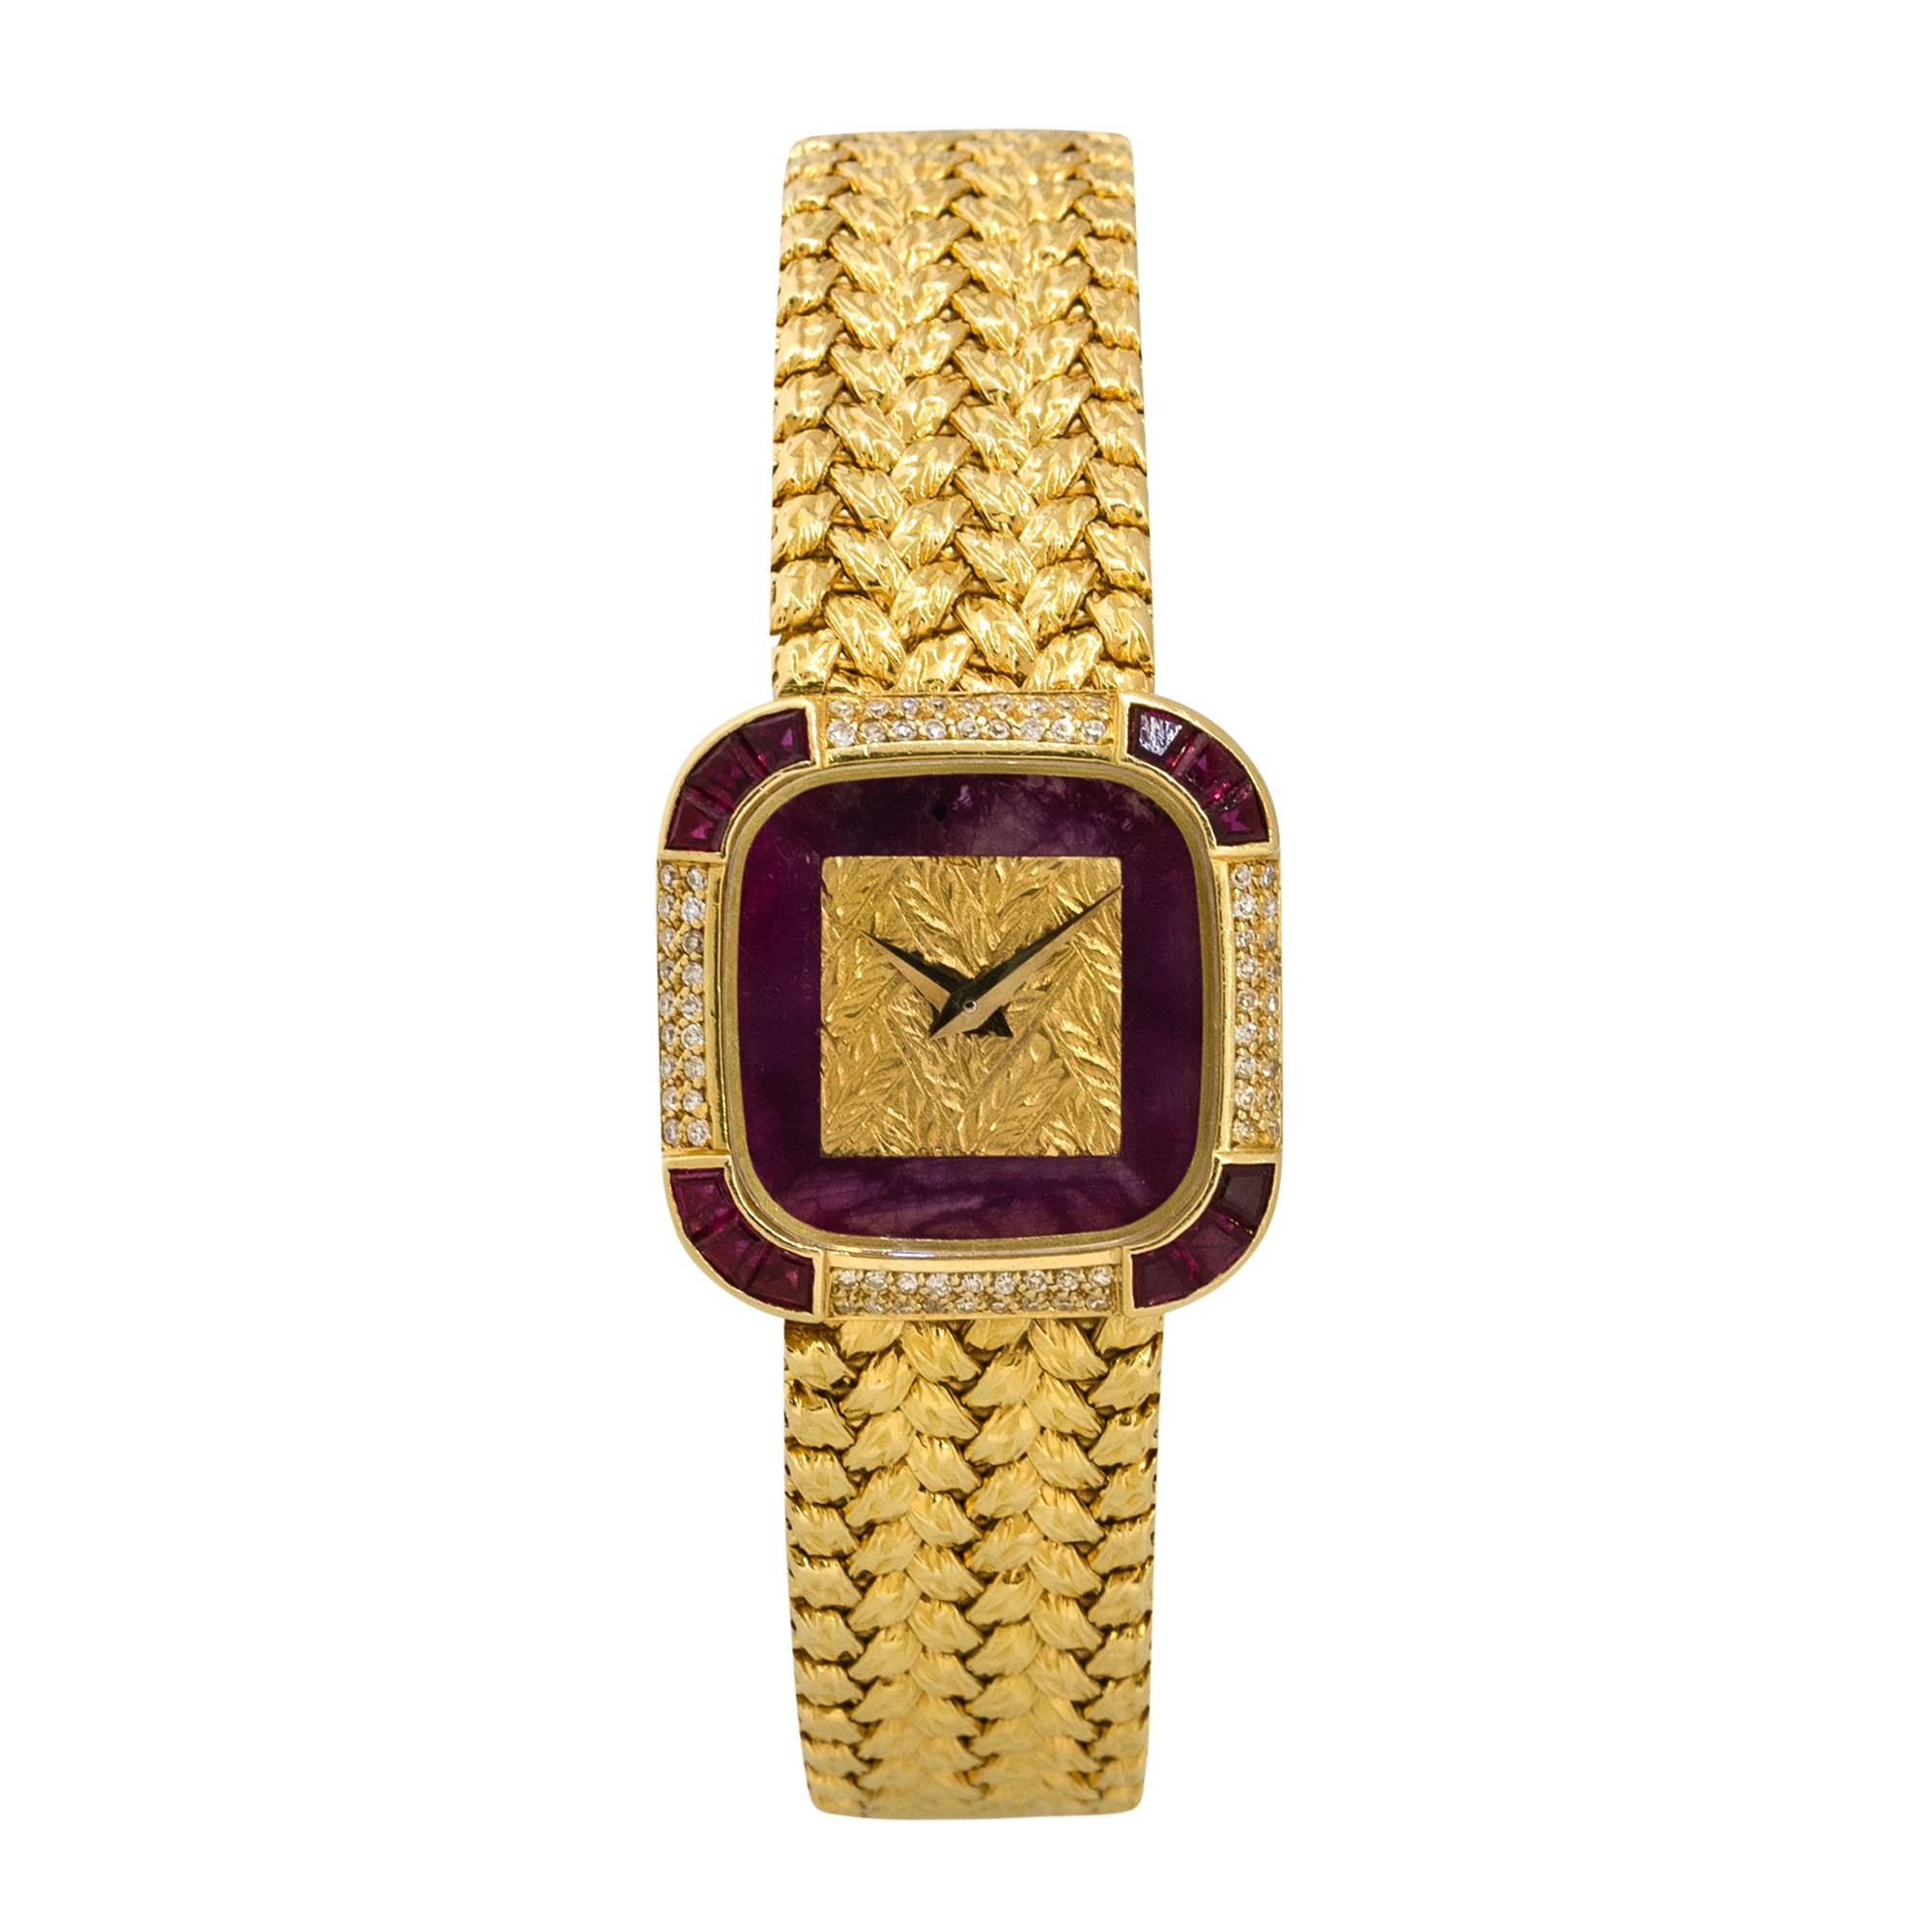 Brand: Piaget
Case Material: 18k Yellow Gold
Case Diameter: 21mm
Crystal: Sapphire Crystal
Bezel: 18k Yellow gold Ruby & Diamond bezel
Dial: Gold & Ruby dial with yellow gold hands
Bracelet: 18k Yellow Gold bracelet
Size: Will fit a